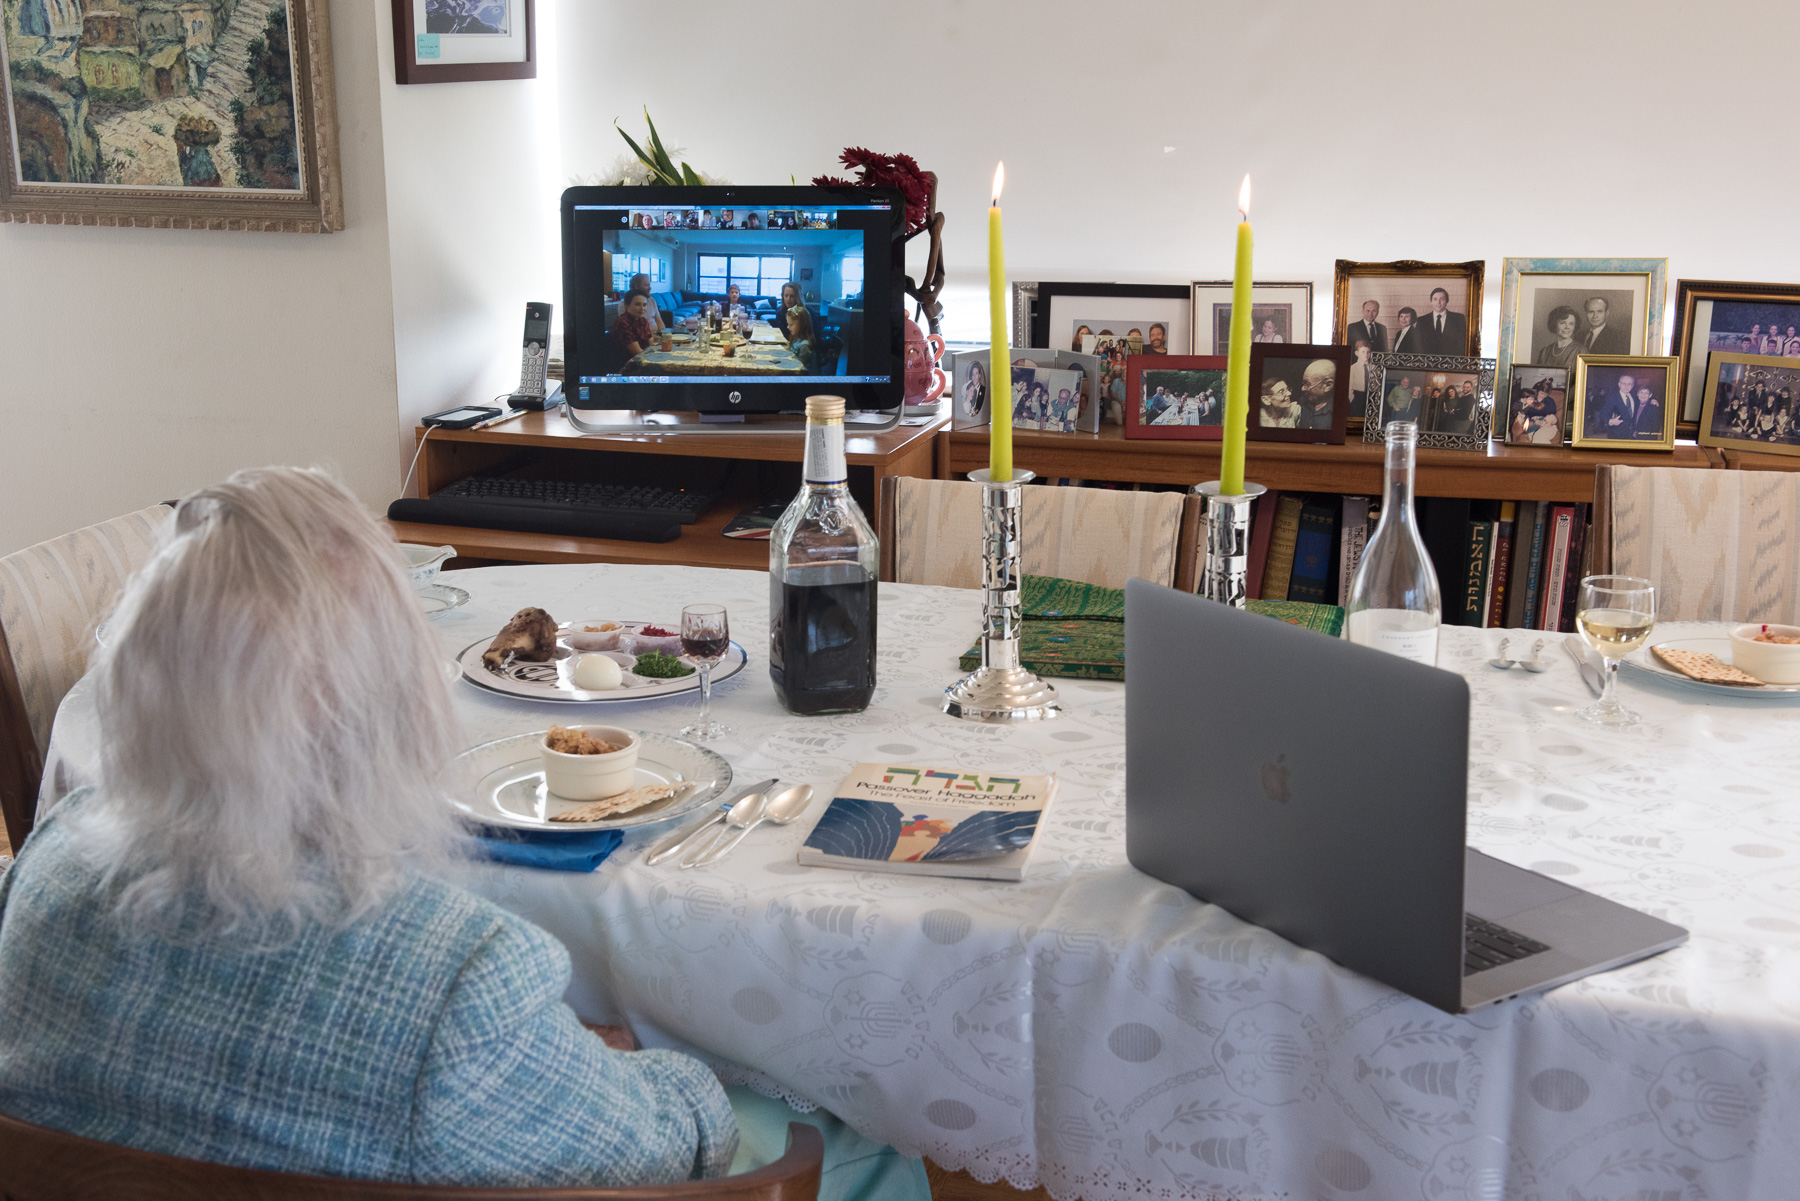 A woman with white hair sits alone at a table set for a Passover Seder meal. She looks at a screen with mutliple people on a Zoom call